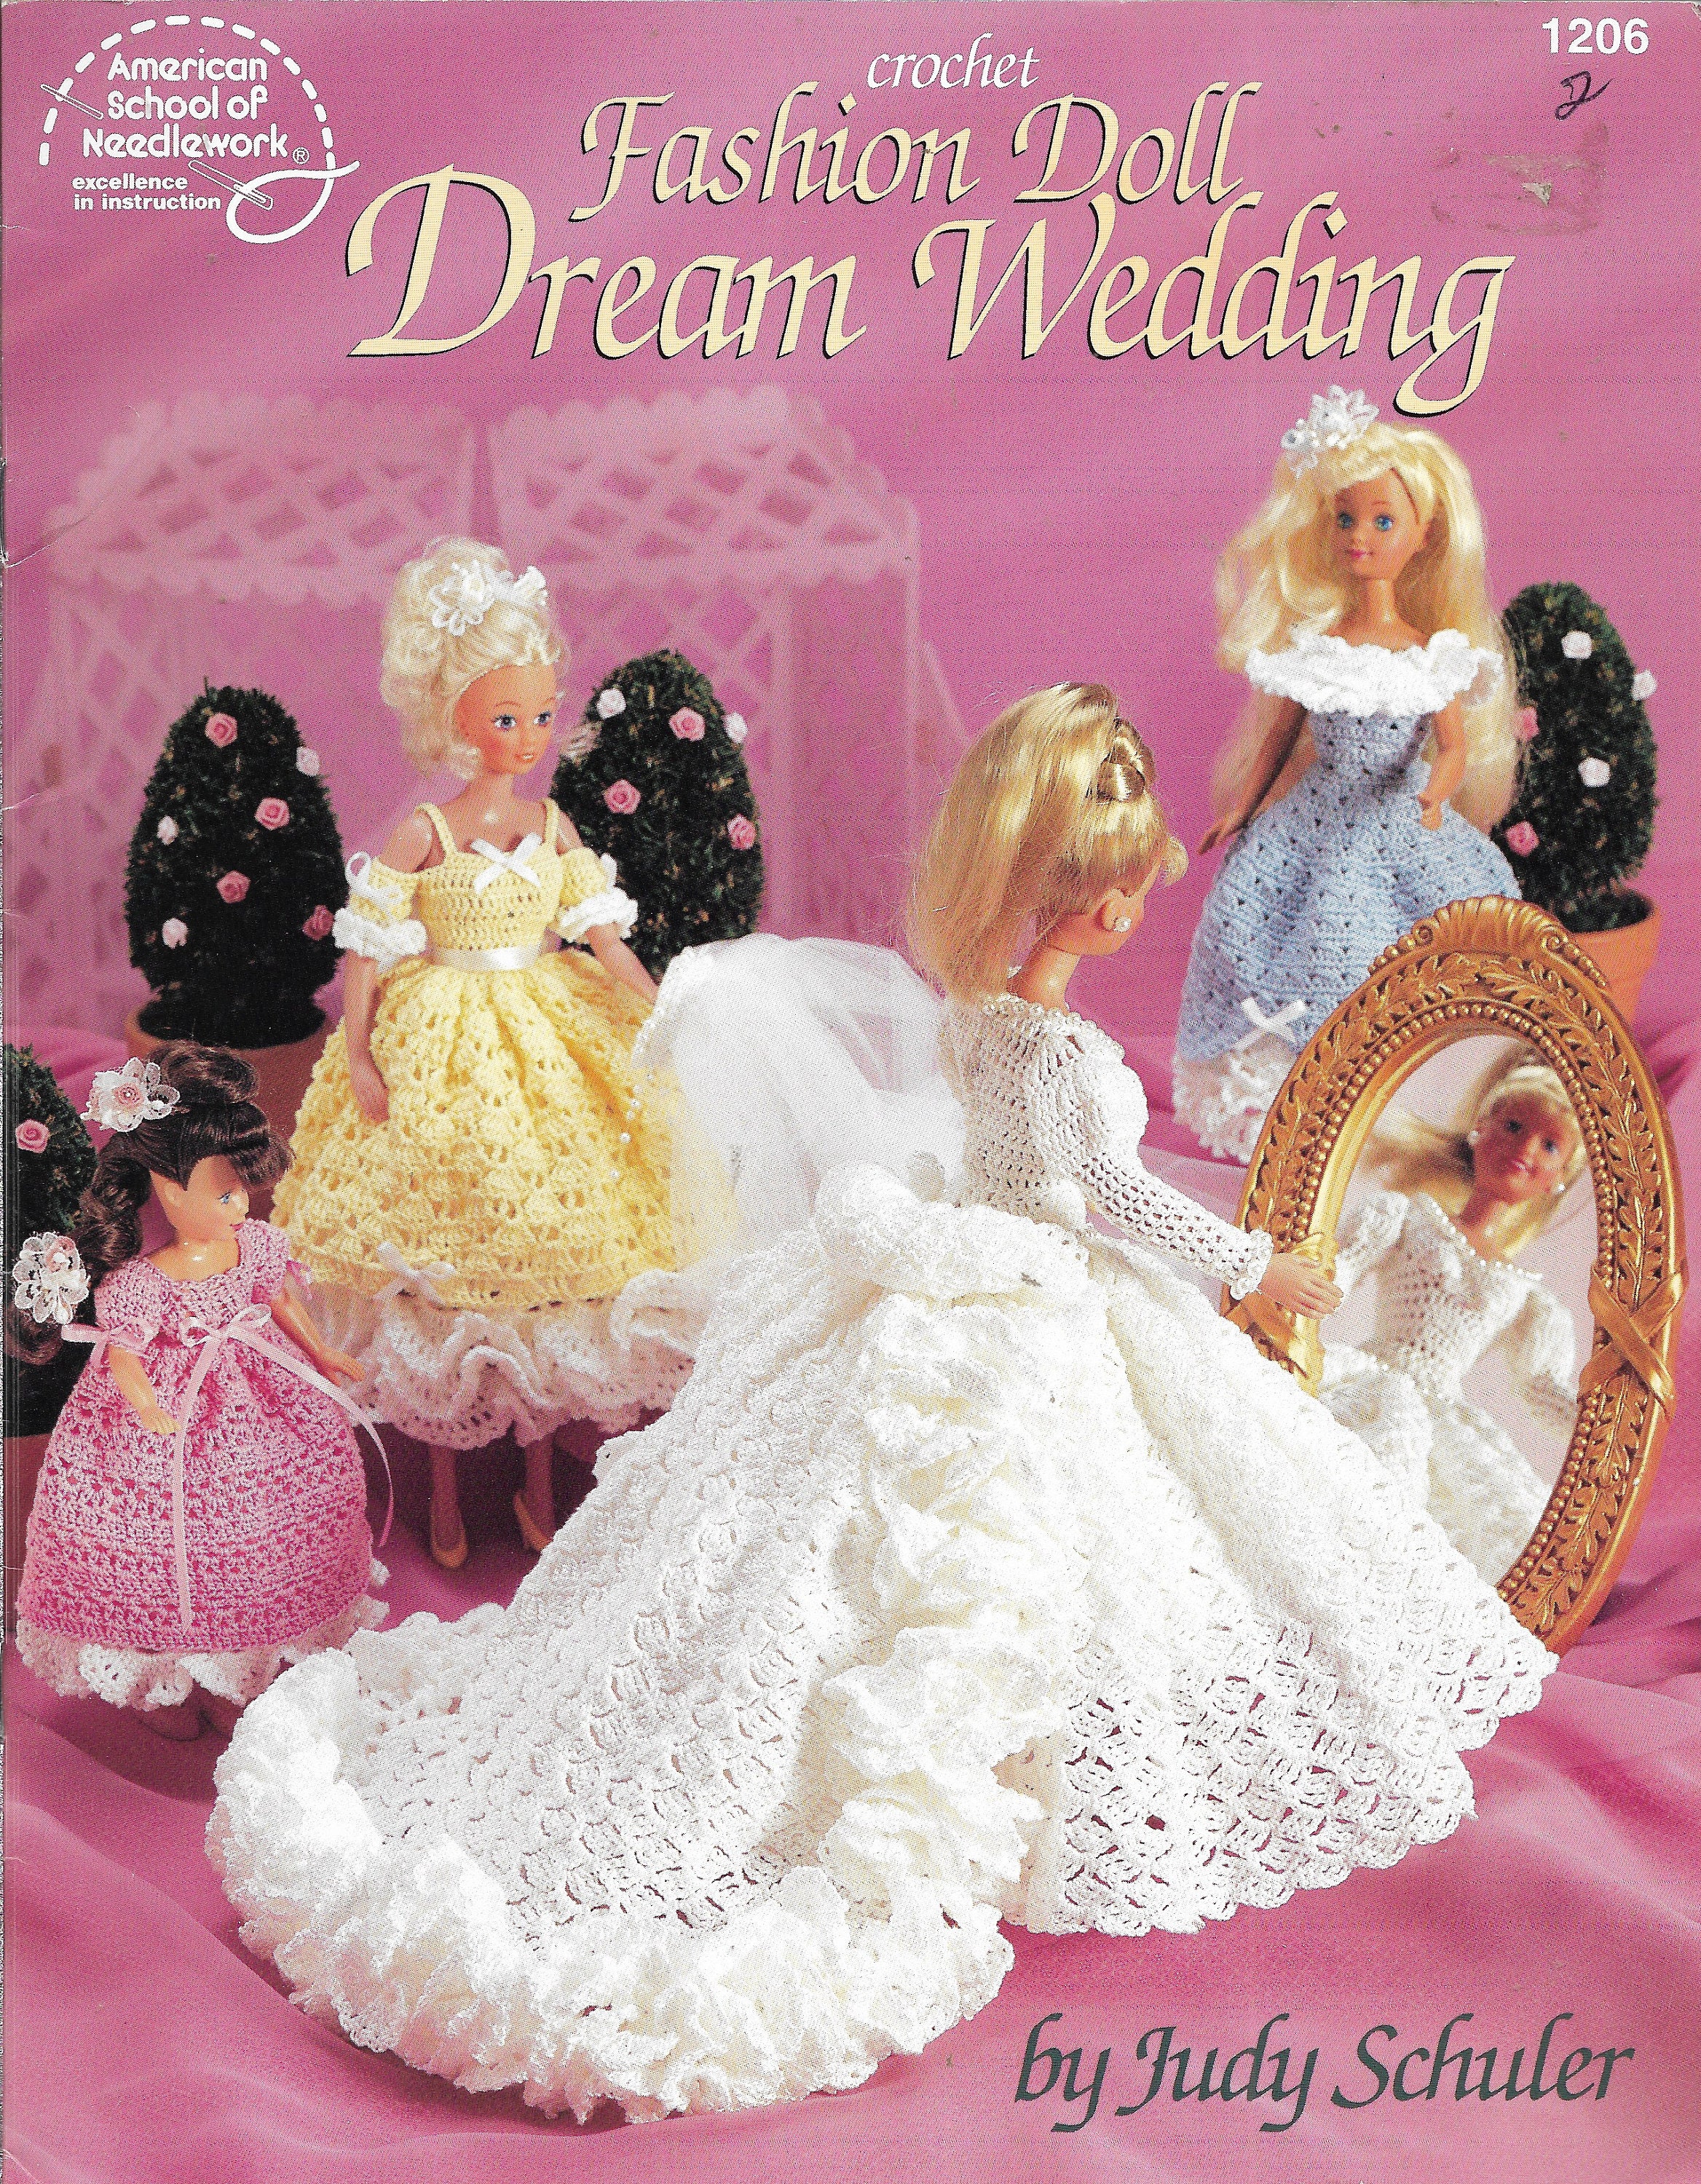 Create or Reproduce Your Wedding Dress for Your Doll, Wedding Doll